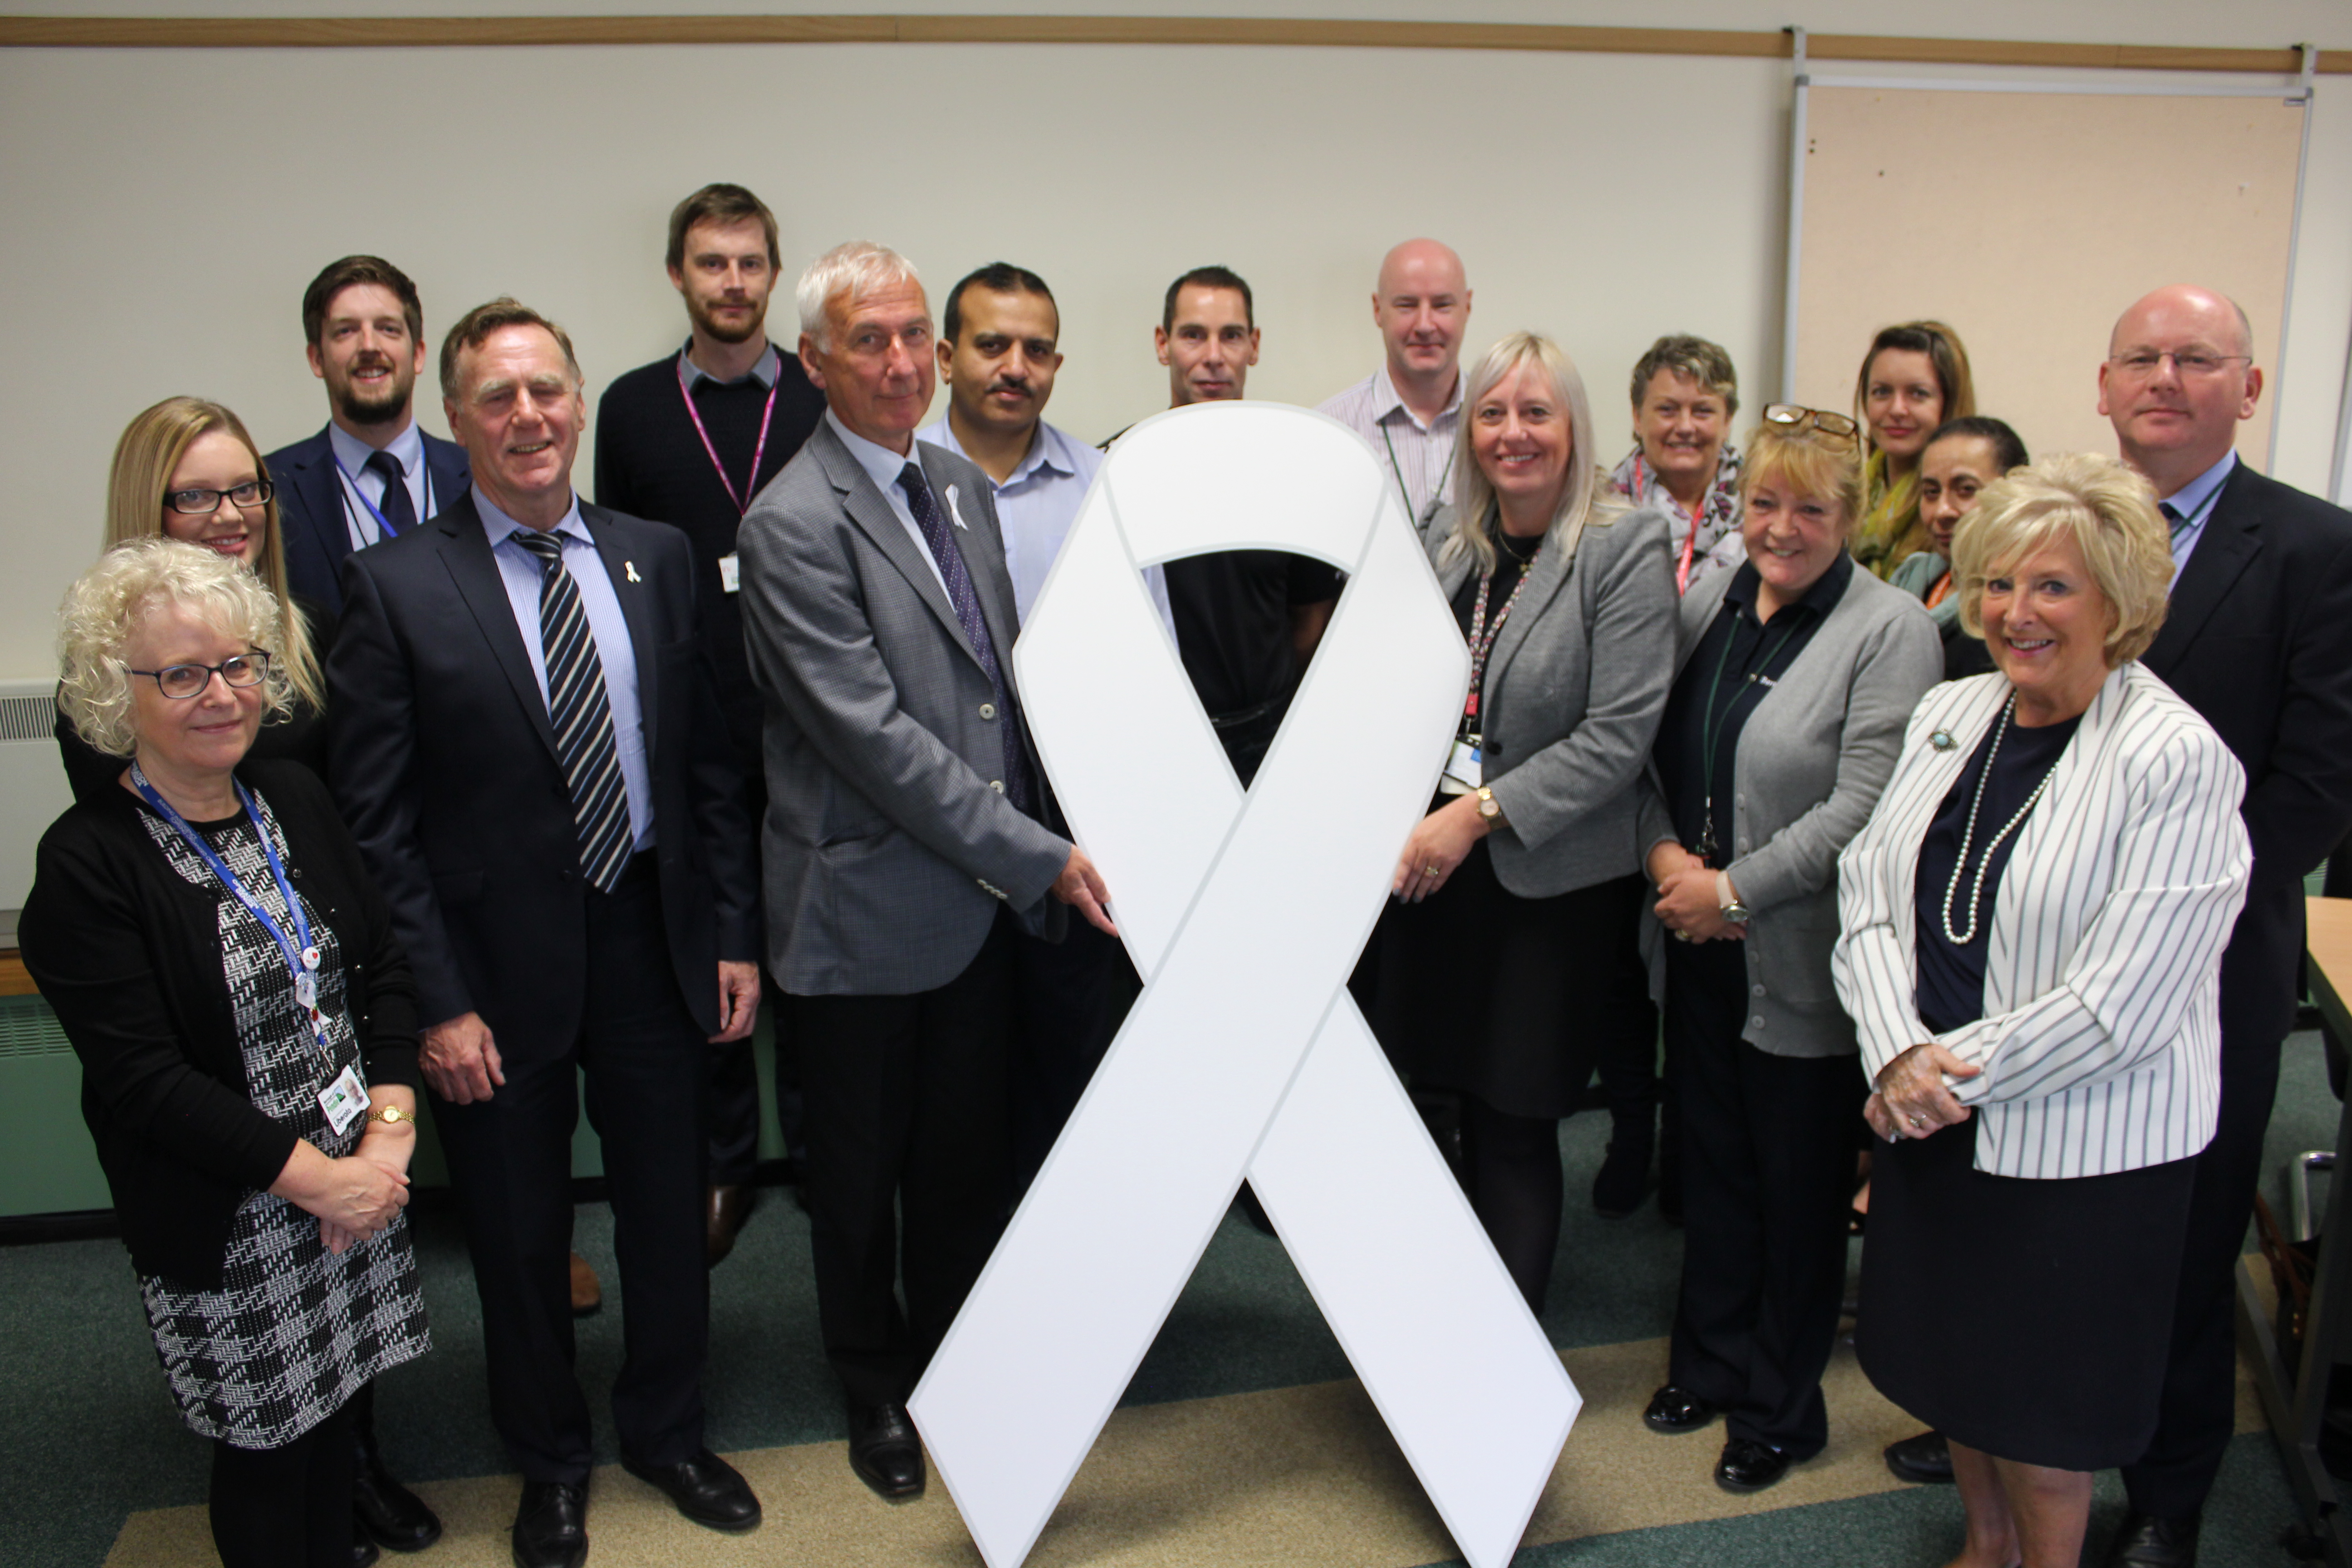 Pendle marks its commitment to ending violence against women and girls